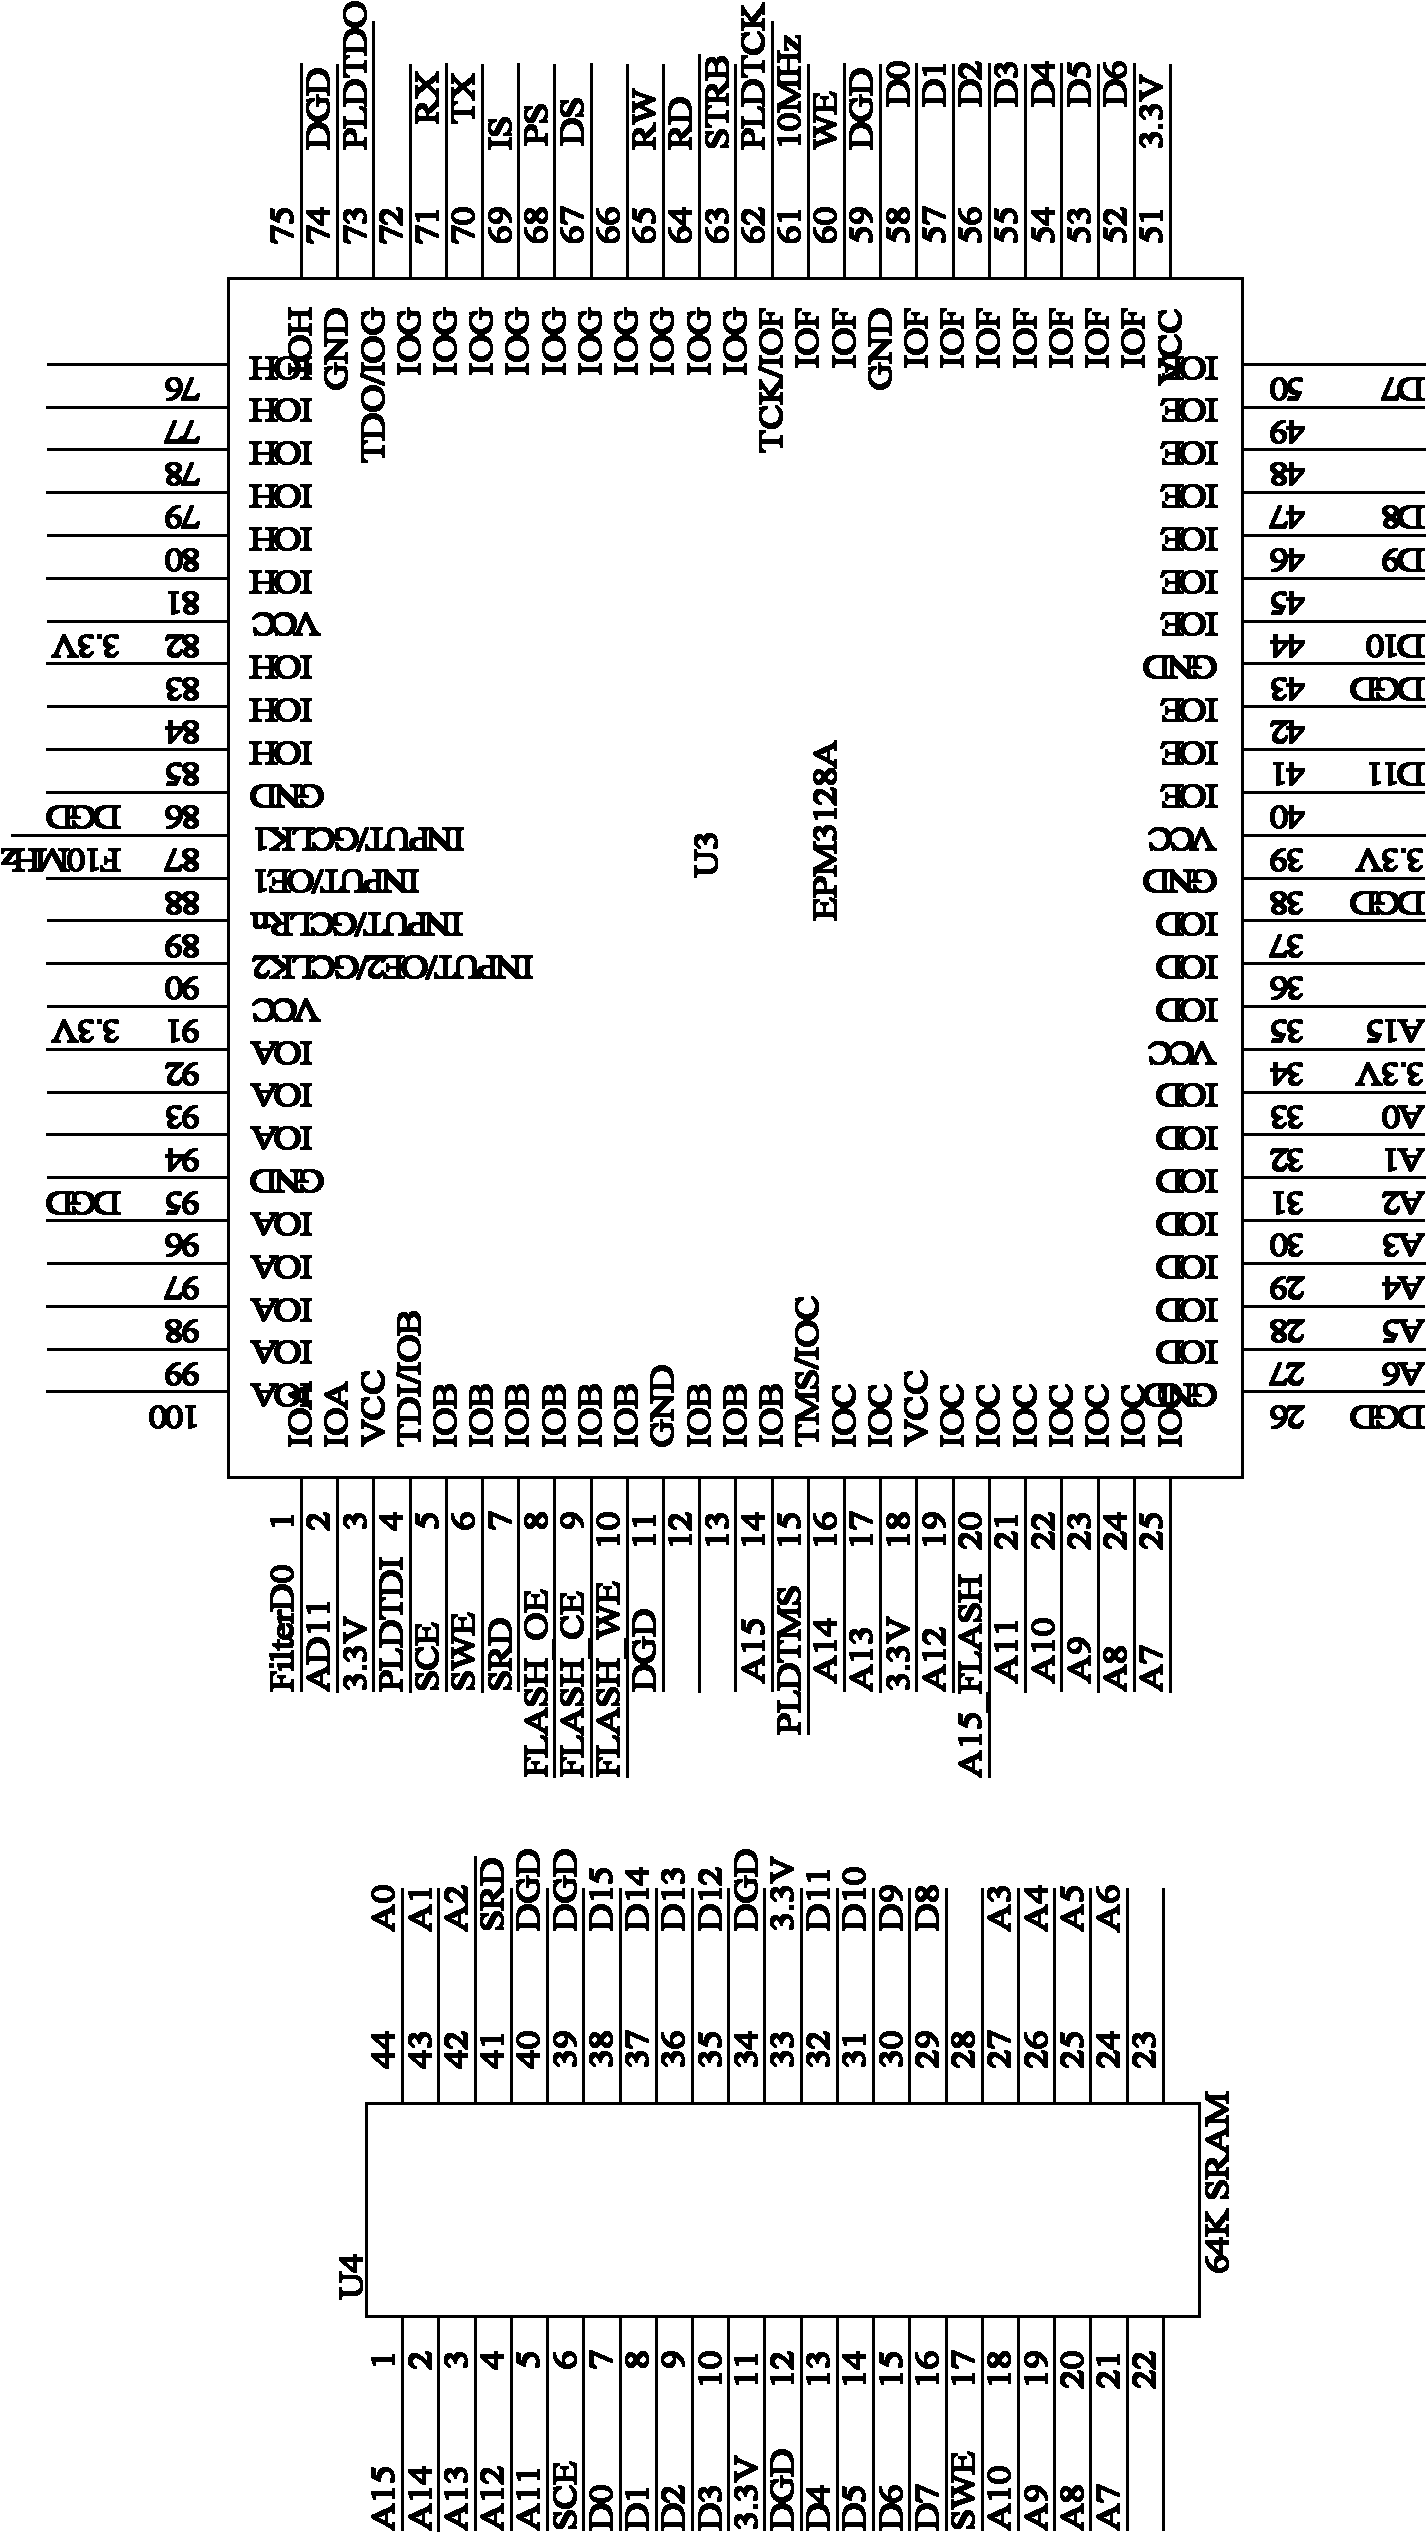 Device capable of receiving and sending various alarming messages and conducting acoustic code word communication